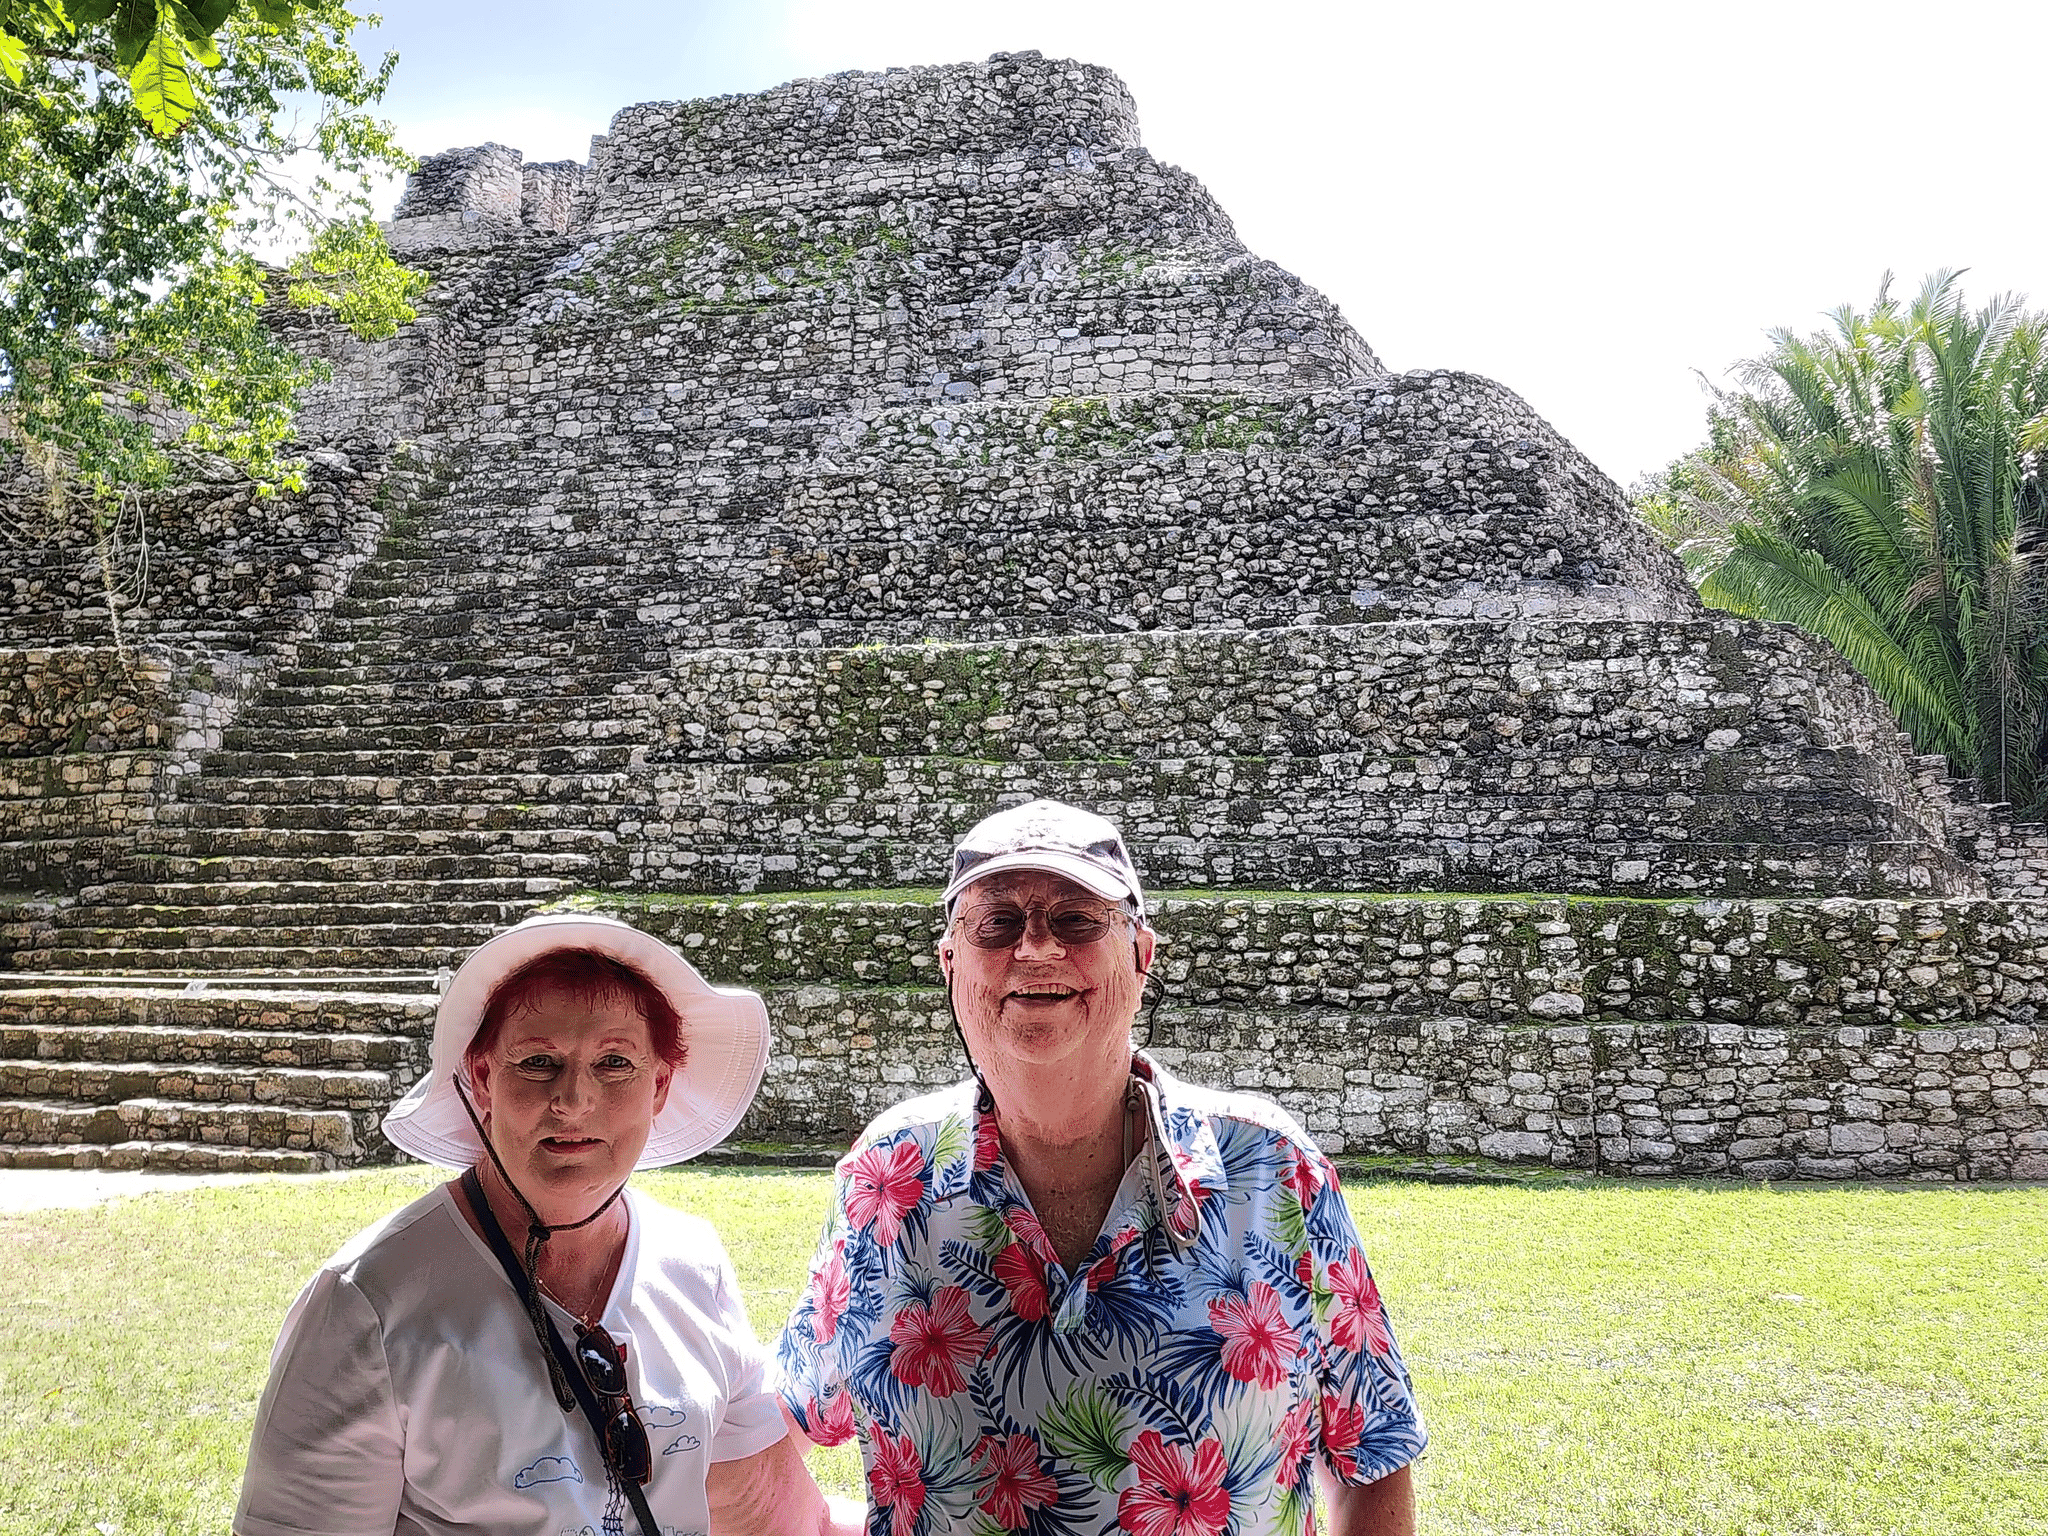 Joan and Joe Griffin at the foot of some majestic Mayan ruins.